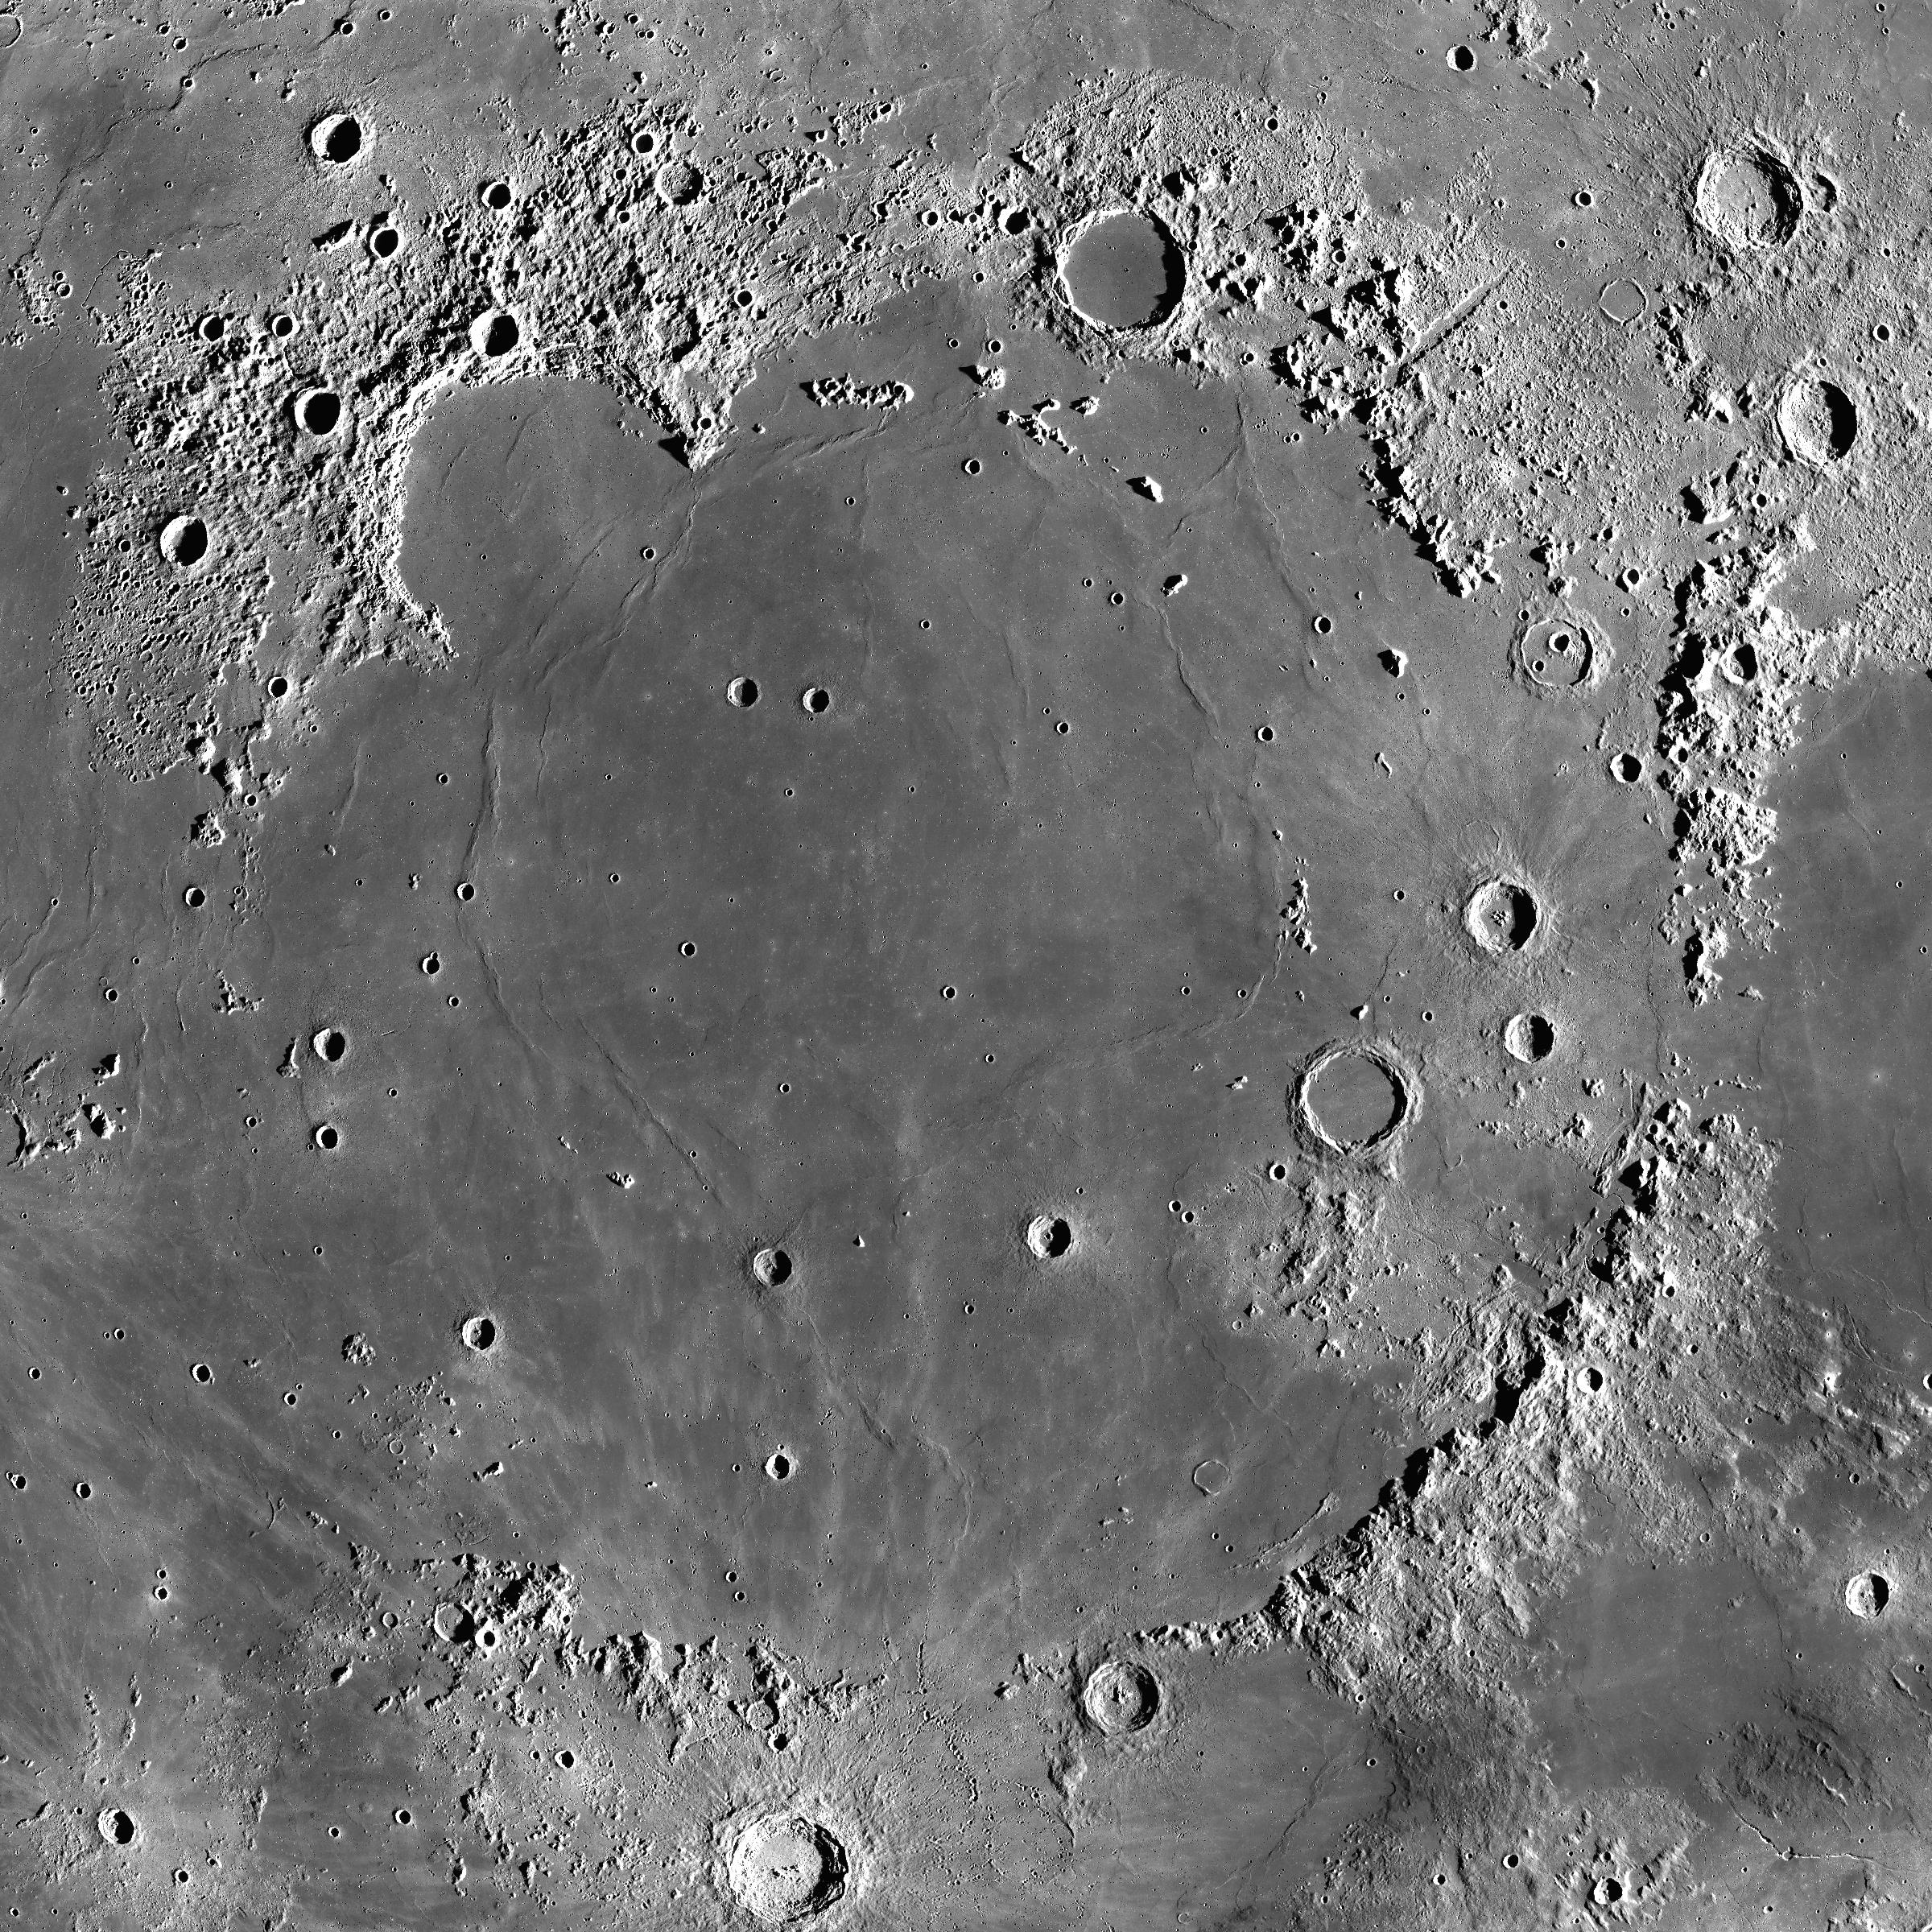 An image of the Mare Imbrium basin, a massive on the moon with a mountain range at its northerly ridge was taken by the Lunar Reconnaissance Orbiter.